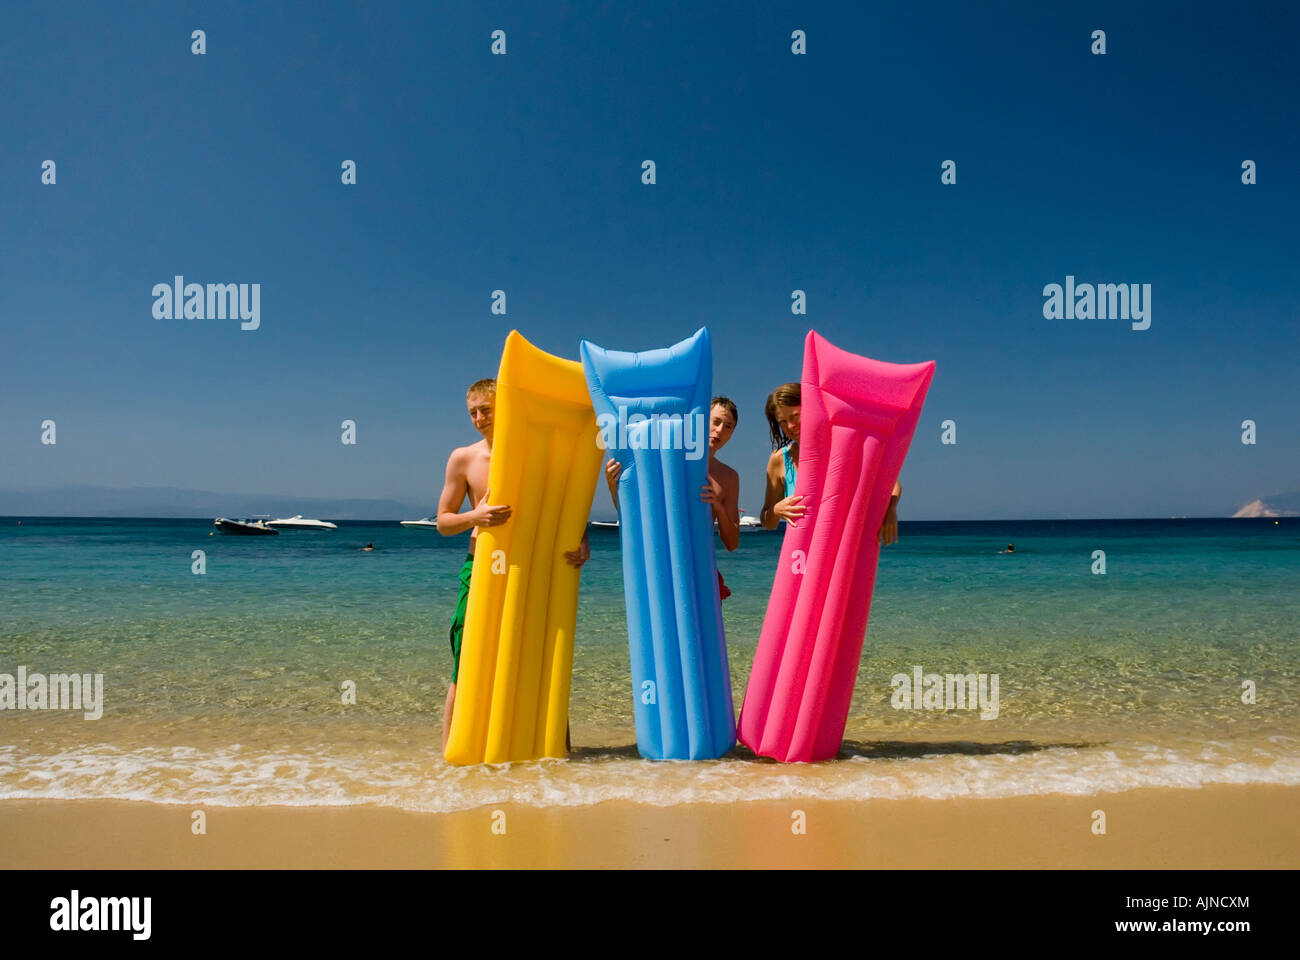 Three people looking out from behind colourful li-los inflatable airbeds sandy beach blue sea and sky Mediterranean Greece Stock Photo